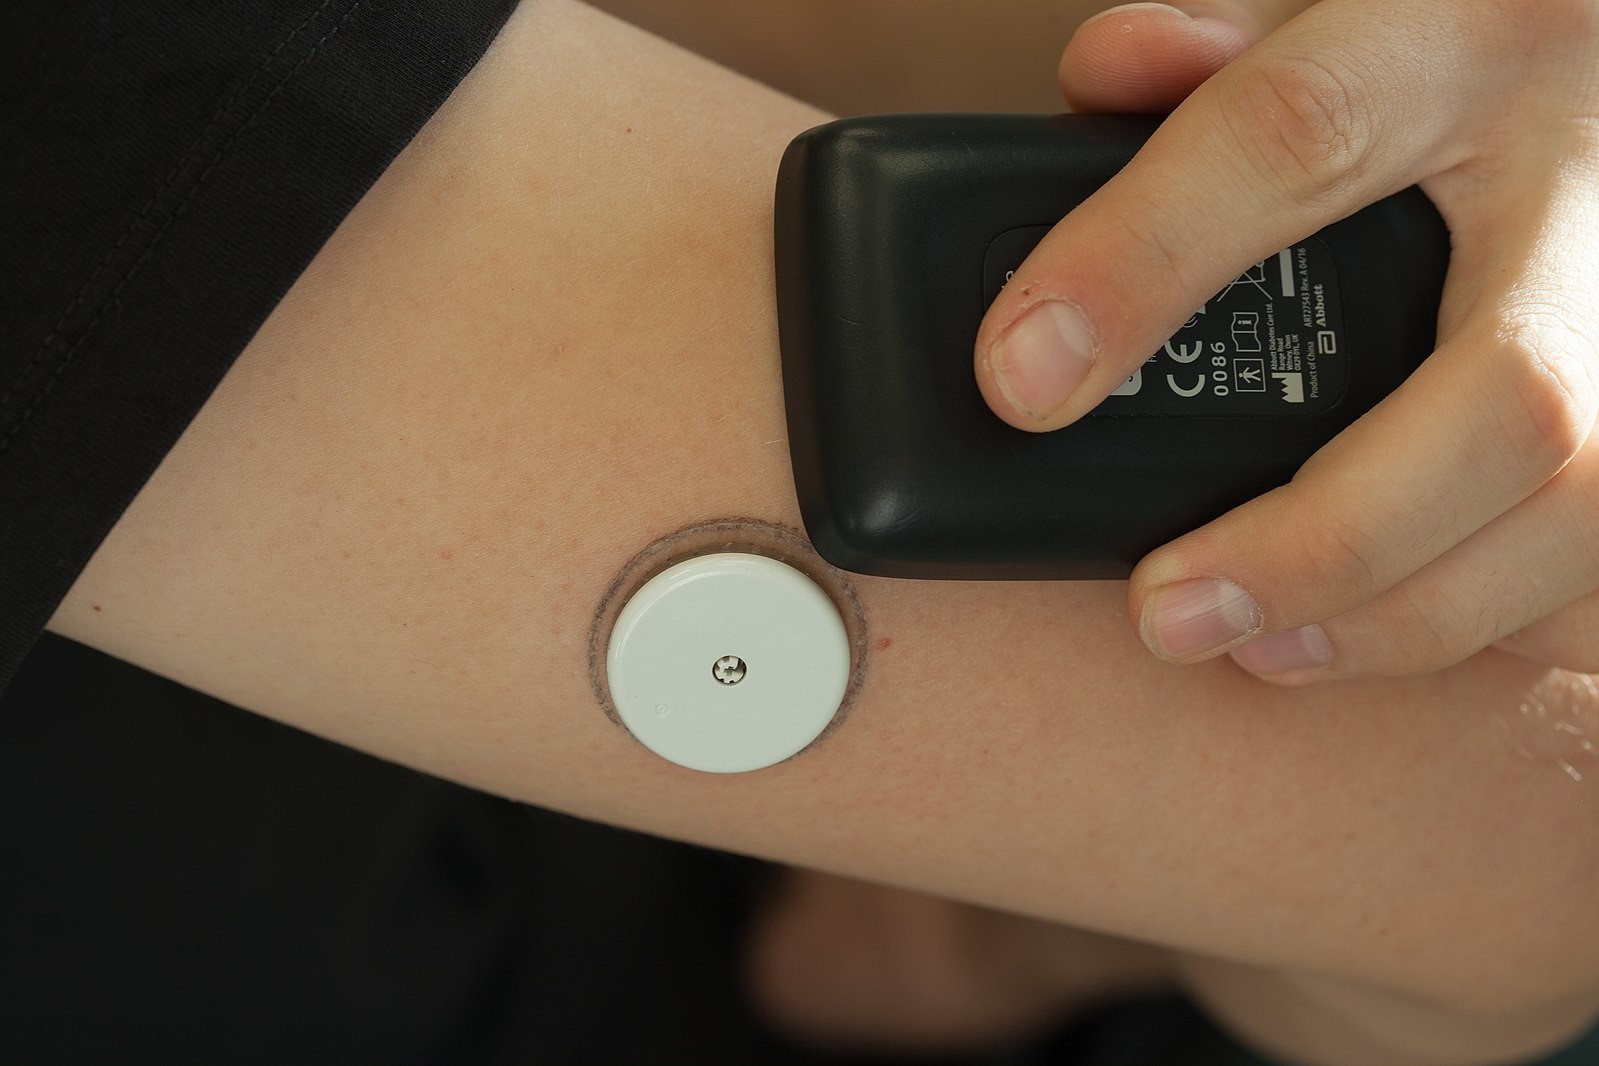 Person with a white, circular continuous glucose monitor on the back of their upper arm holding black display monitor next to it